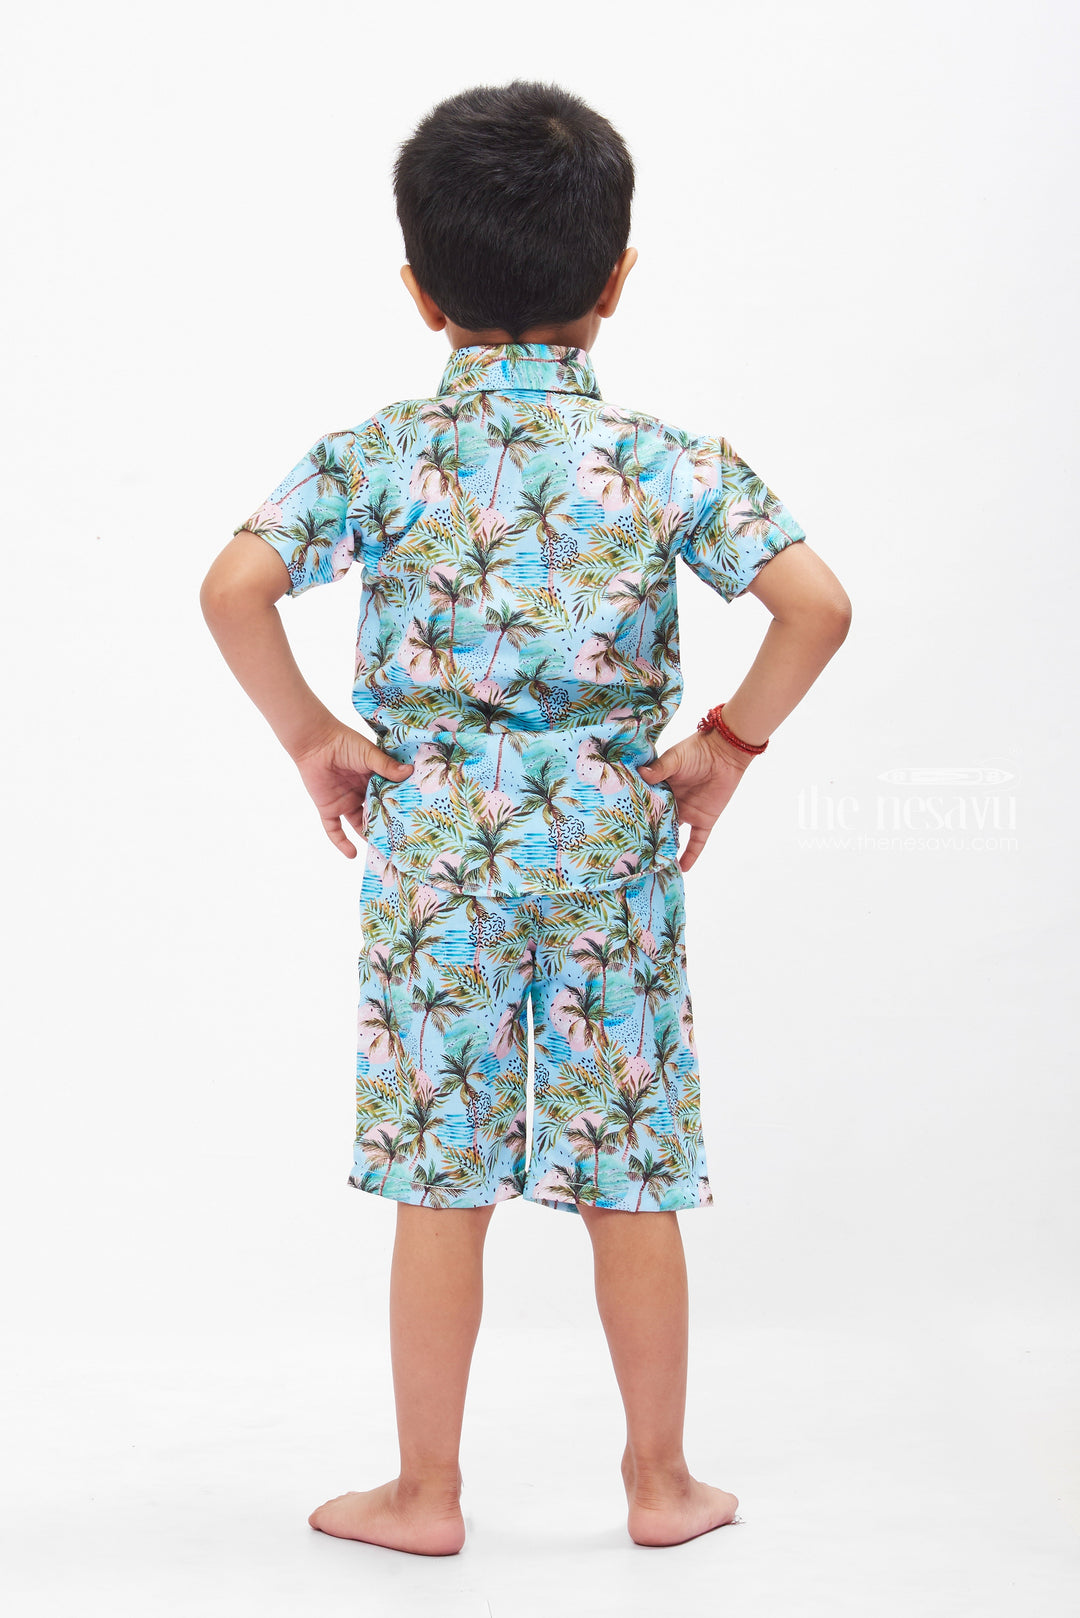 The Nesavu Boys Casual Set Tropical Palm Tree Boys Shorts and Shirt Set Nesavu Boys Casual Two-Piece Set with Shorts and Shirt | Comfortable Summer Outfit | The Nesavu